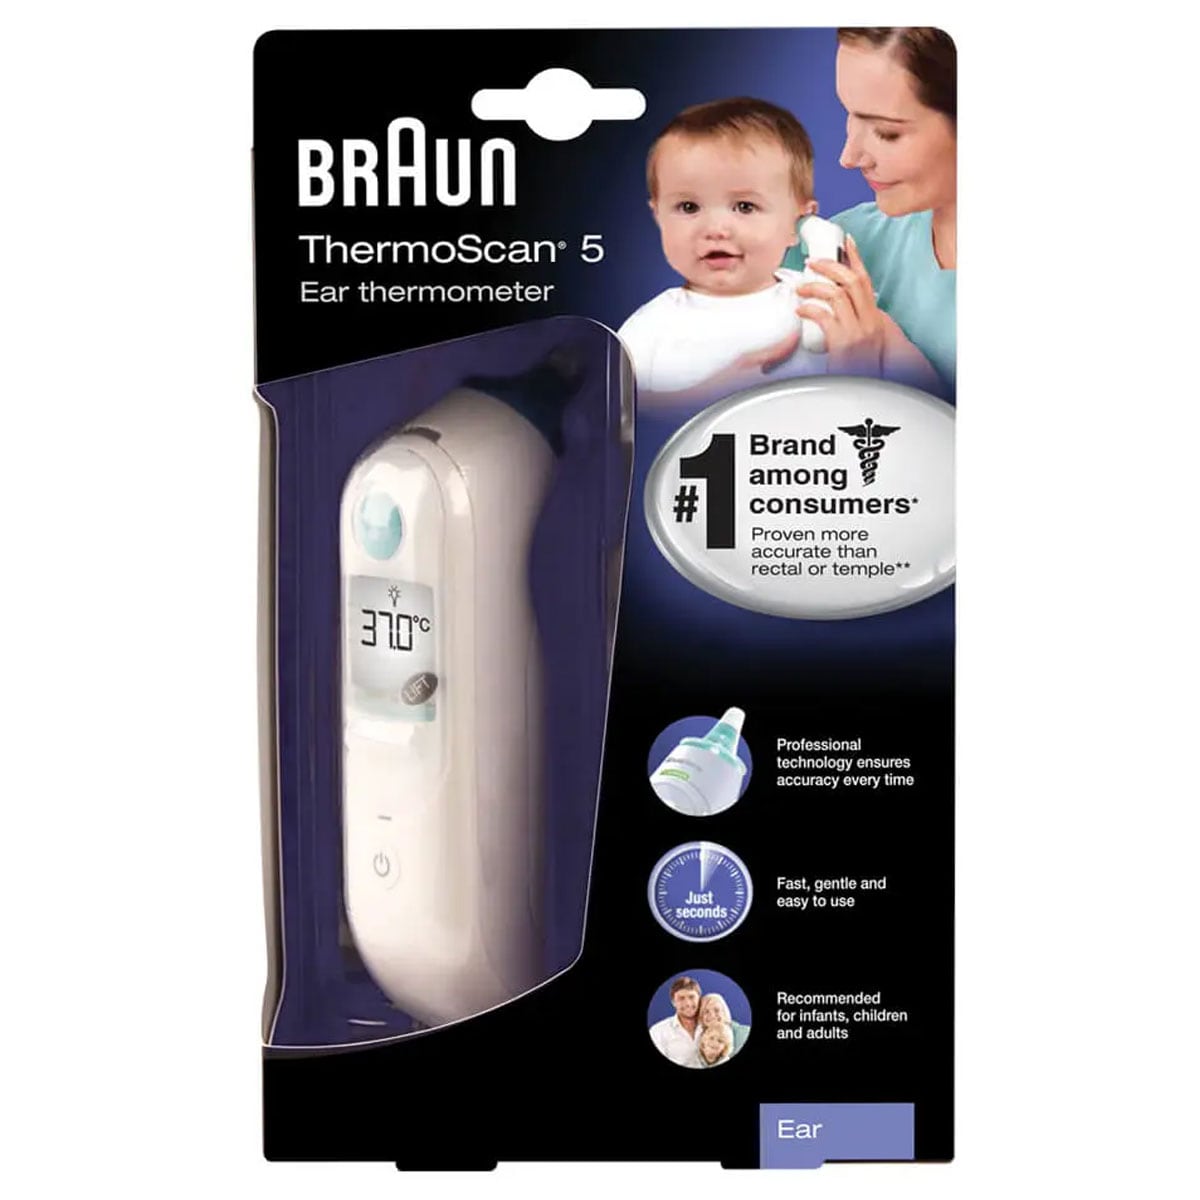 Braun ThermoScan 5 IRT 6030 Ear Thermometer